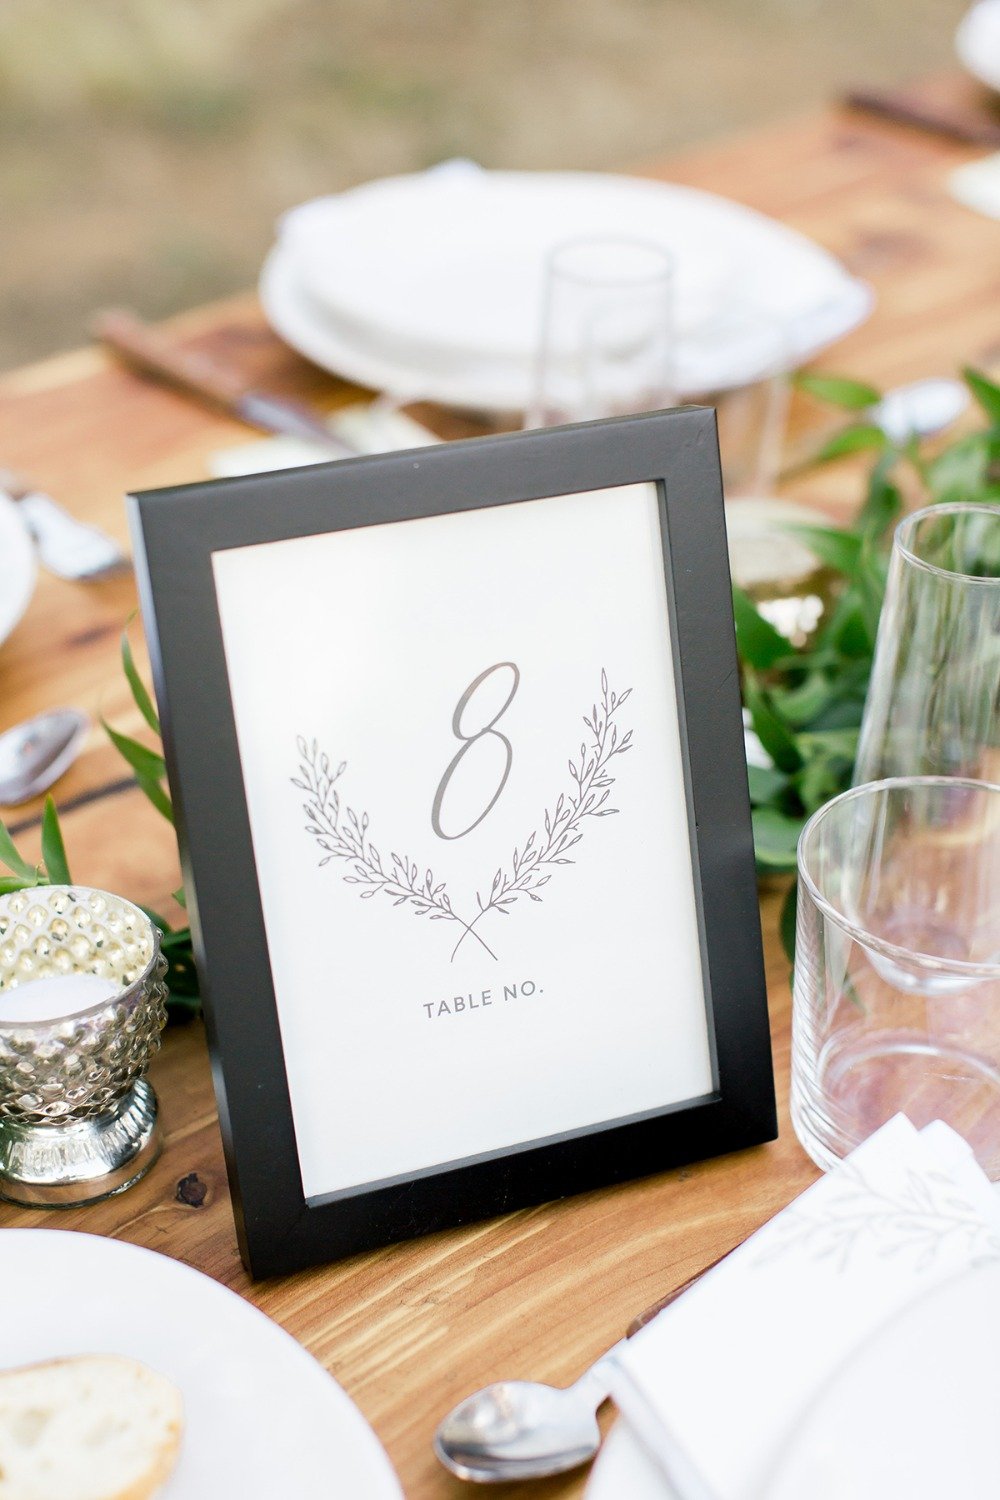 Framed table numbers